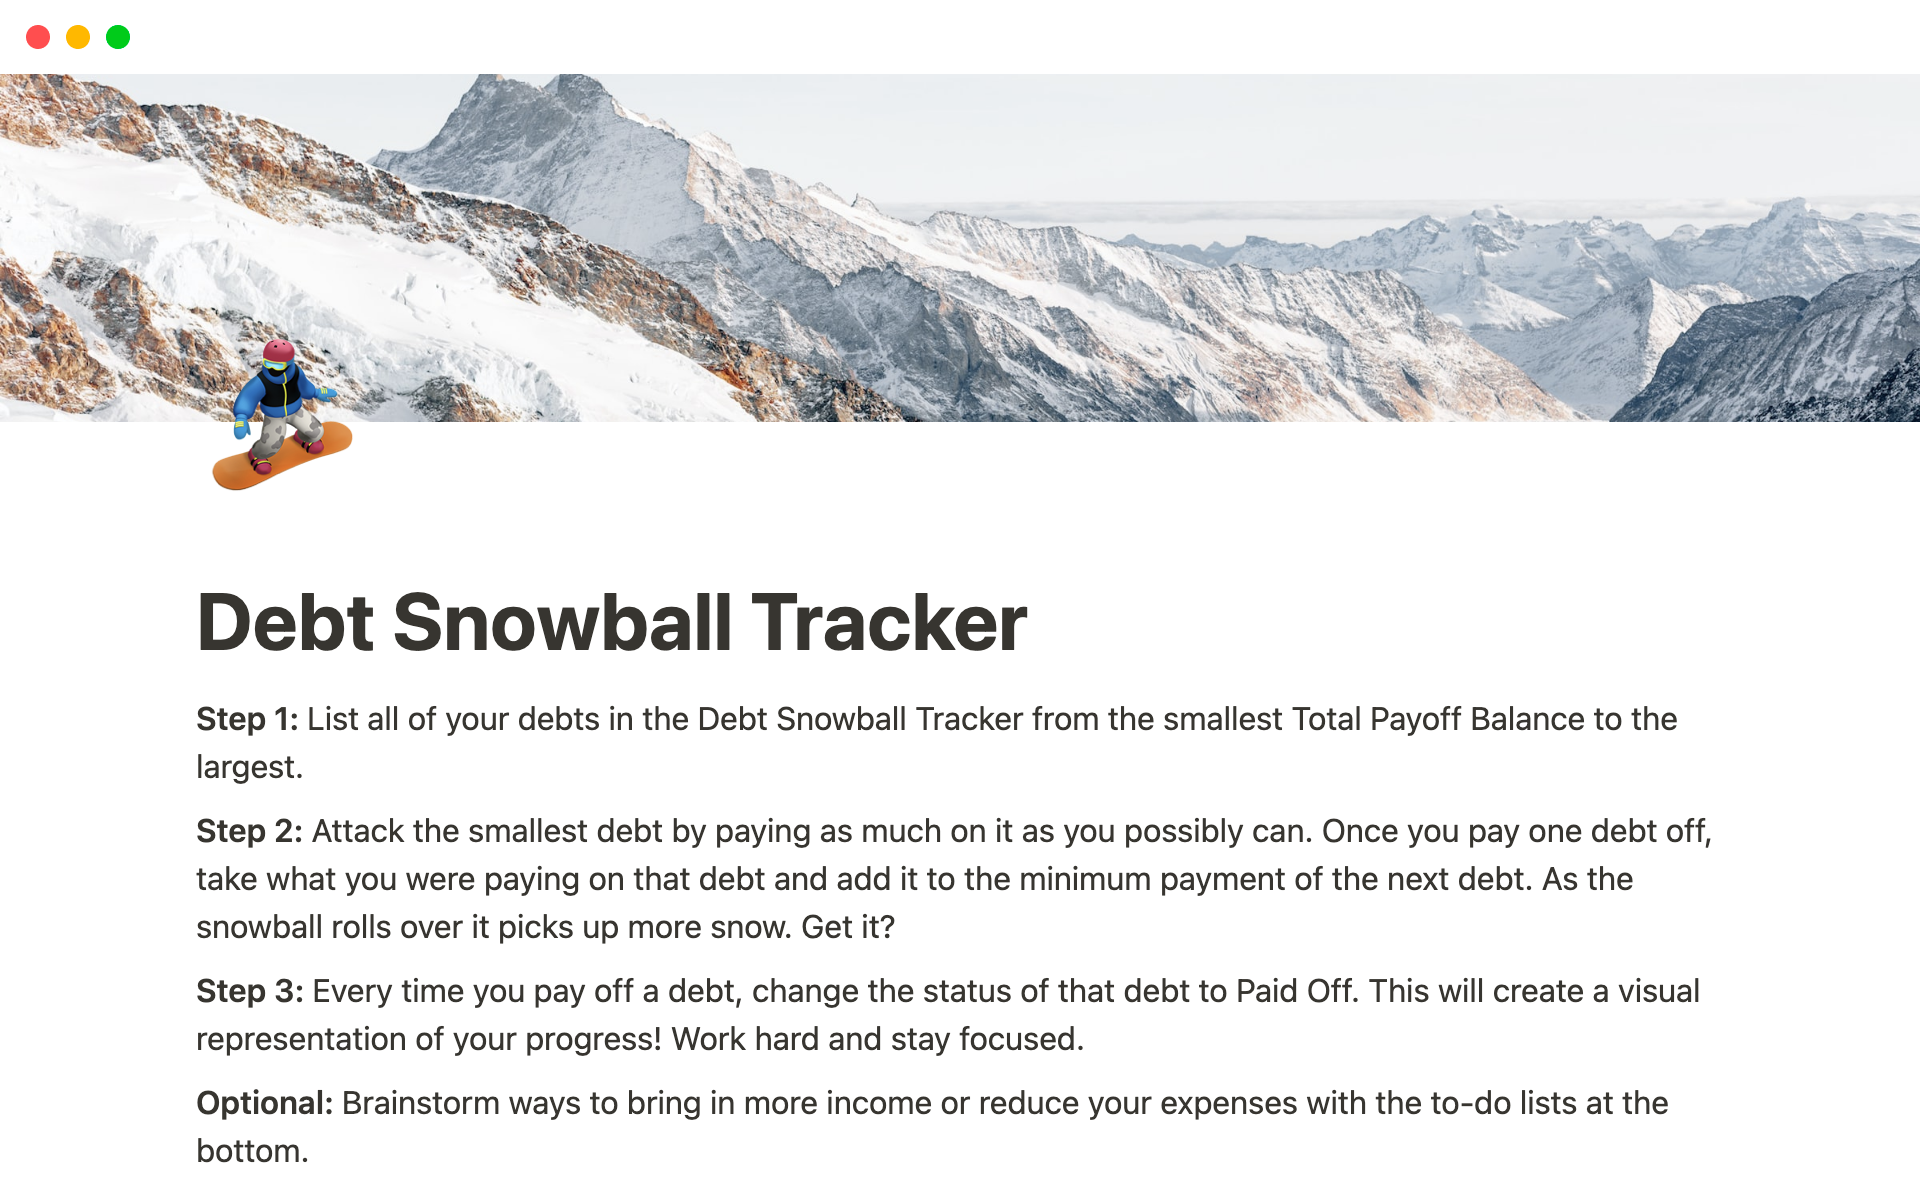 This template allows you to keep track and pay off your debt with the debt snowball method.